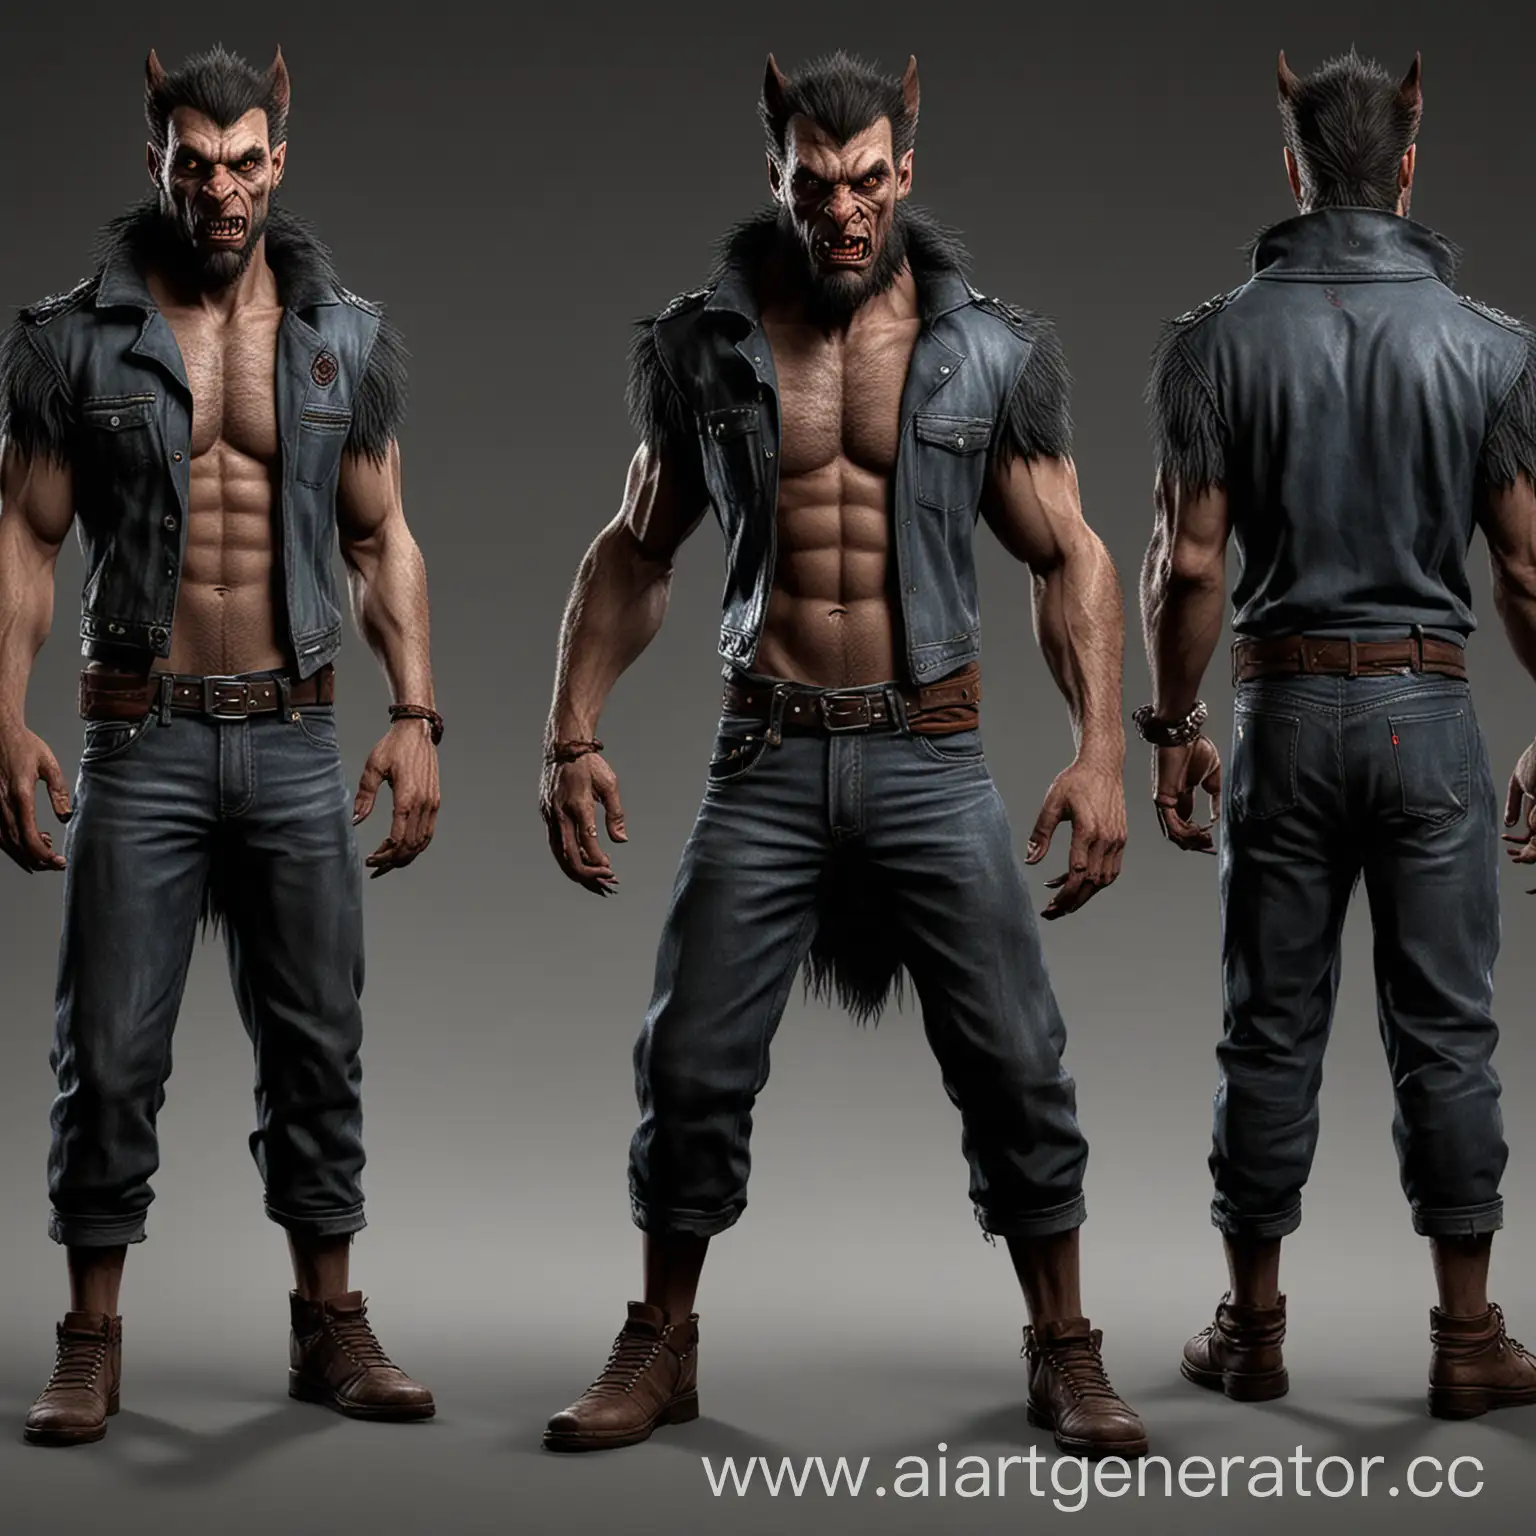 Werewolf-Costume-Character-Design-for-3D-Game-Avatar